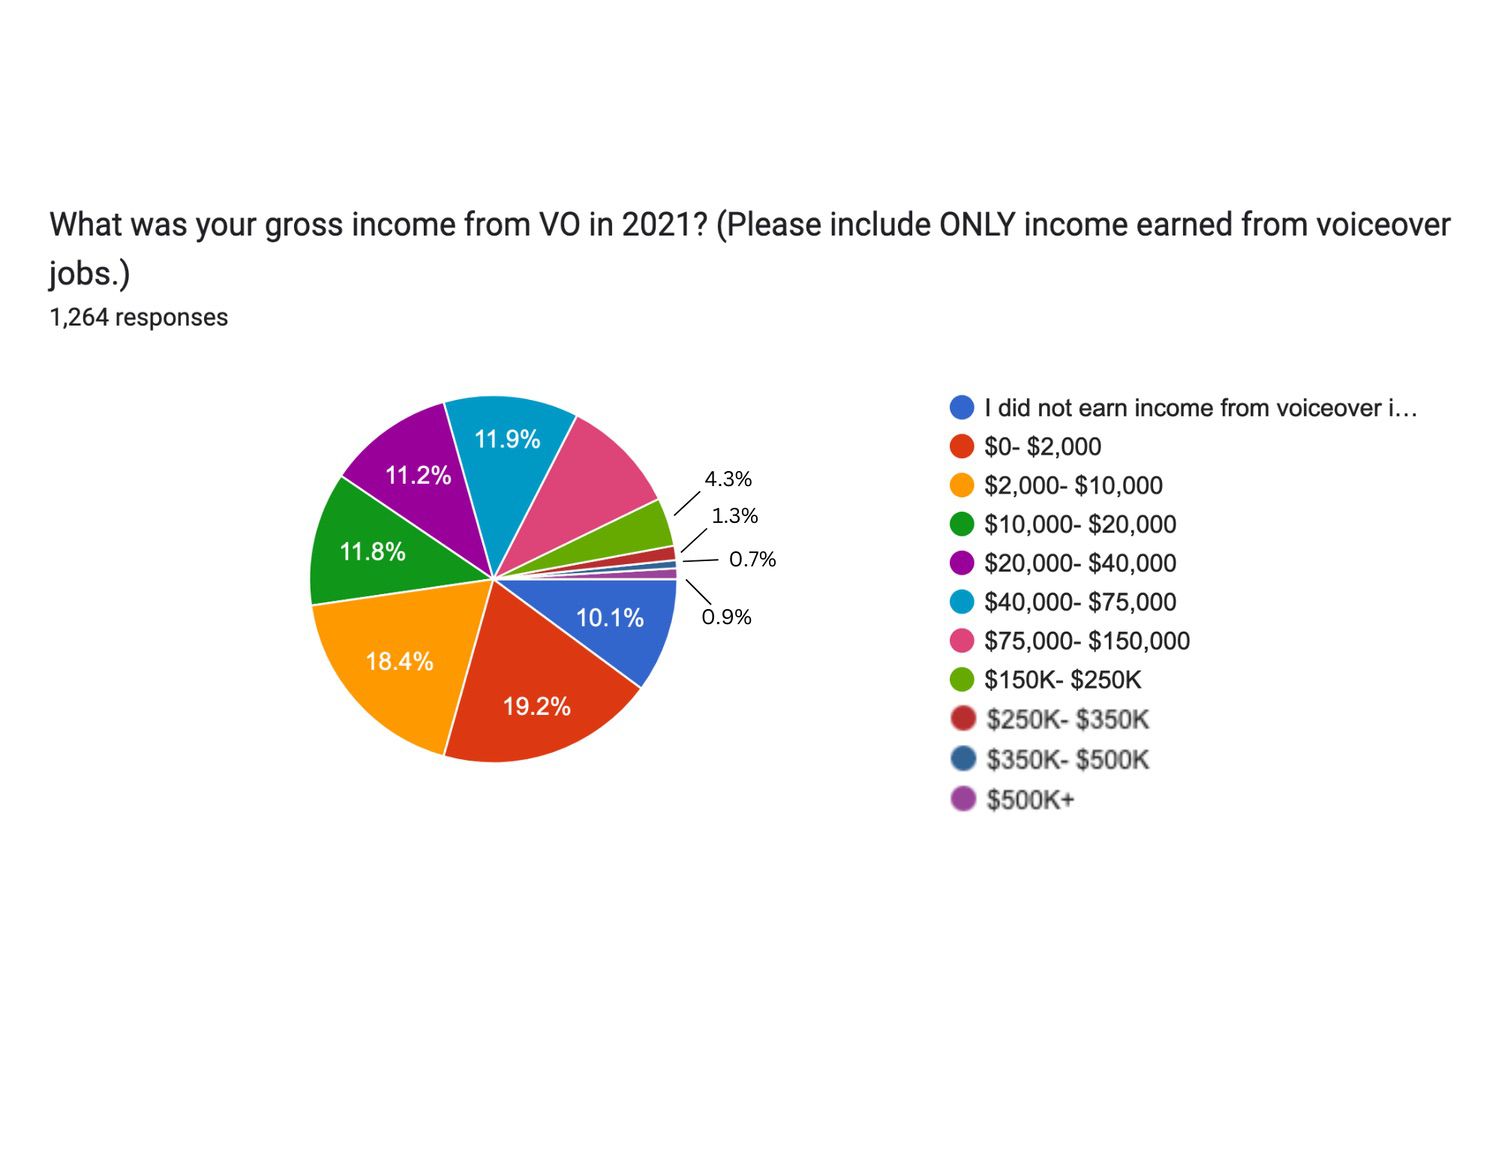 What was your gross income from VO in 2021?